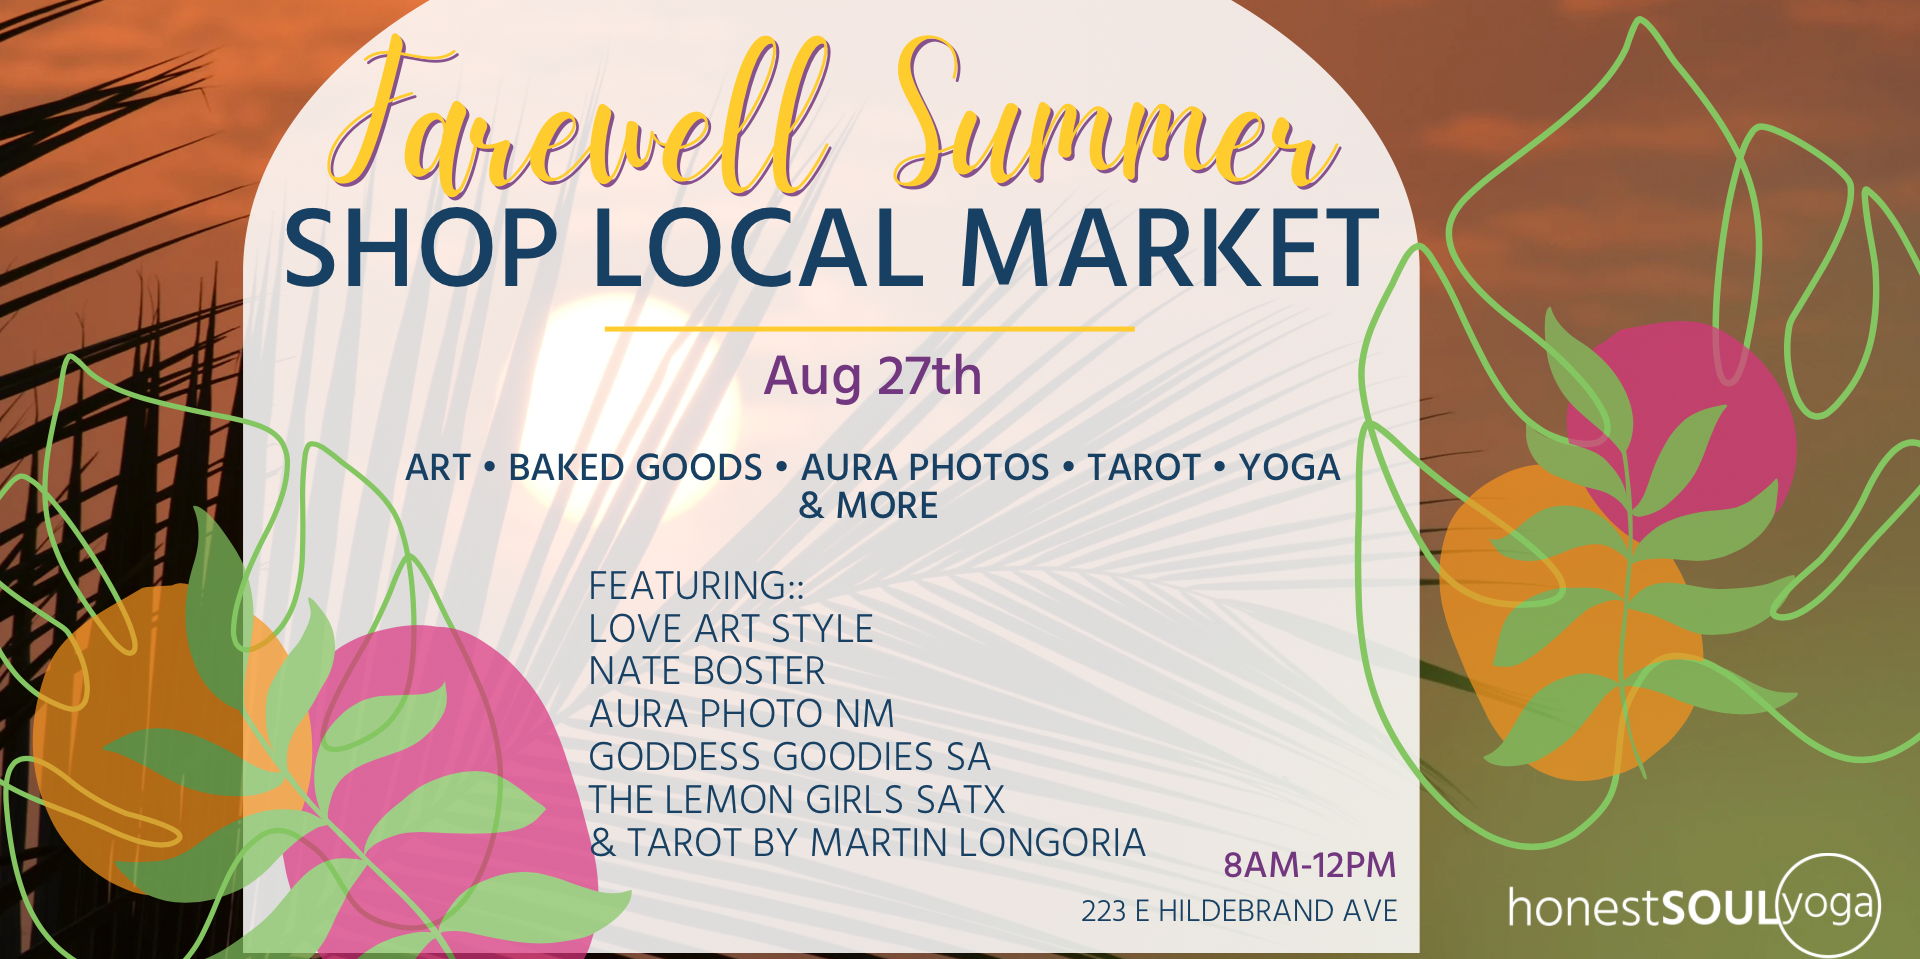 Farewell Summer Shop Local Market  promotional image